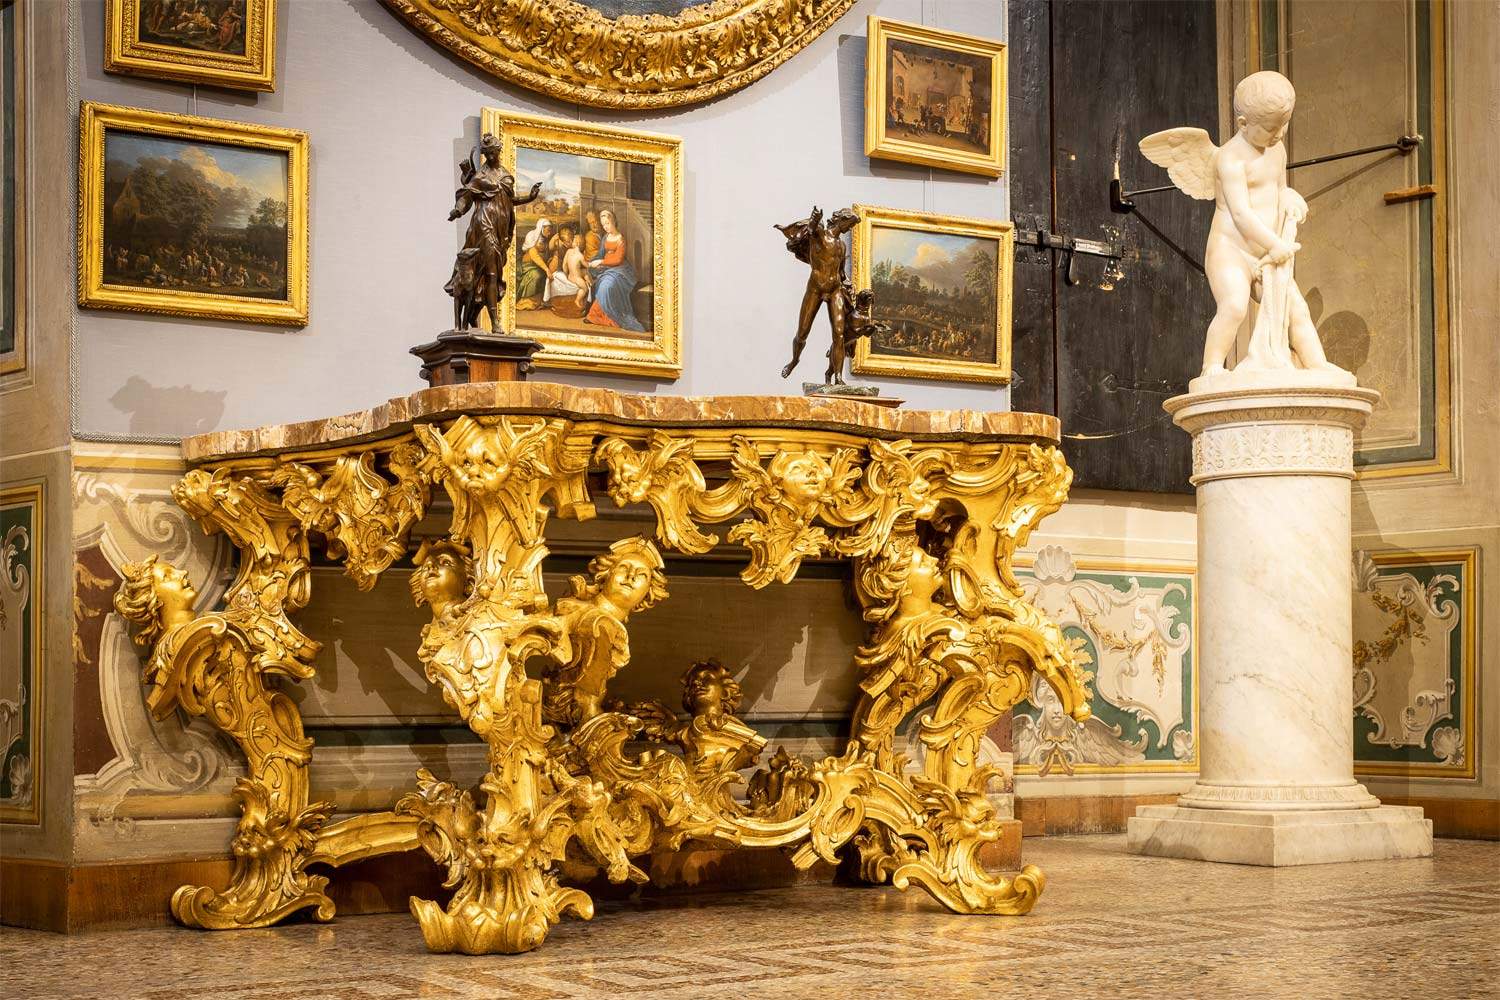 Rome, restoration of Corsini Gallery's spectacular 18th-century console completed